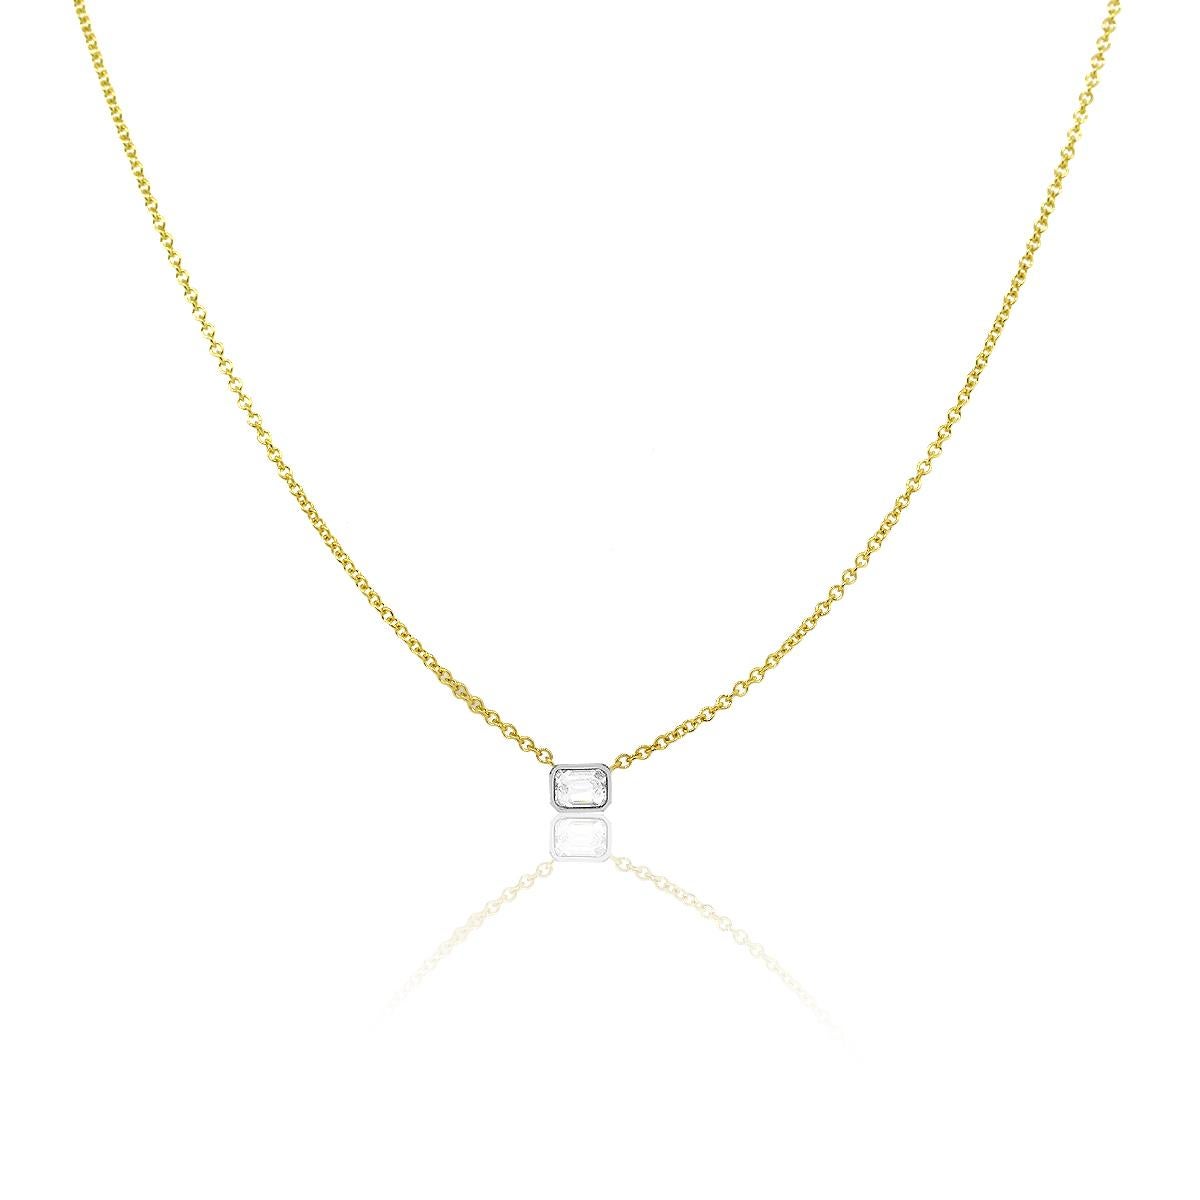 Material: 18k yellow gold
Measurements: 18″ in length with shortening ring at 16